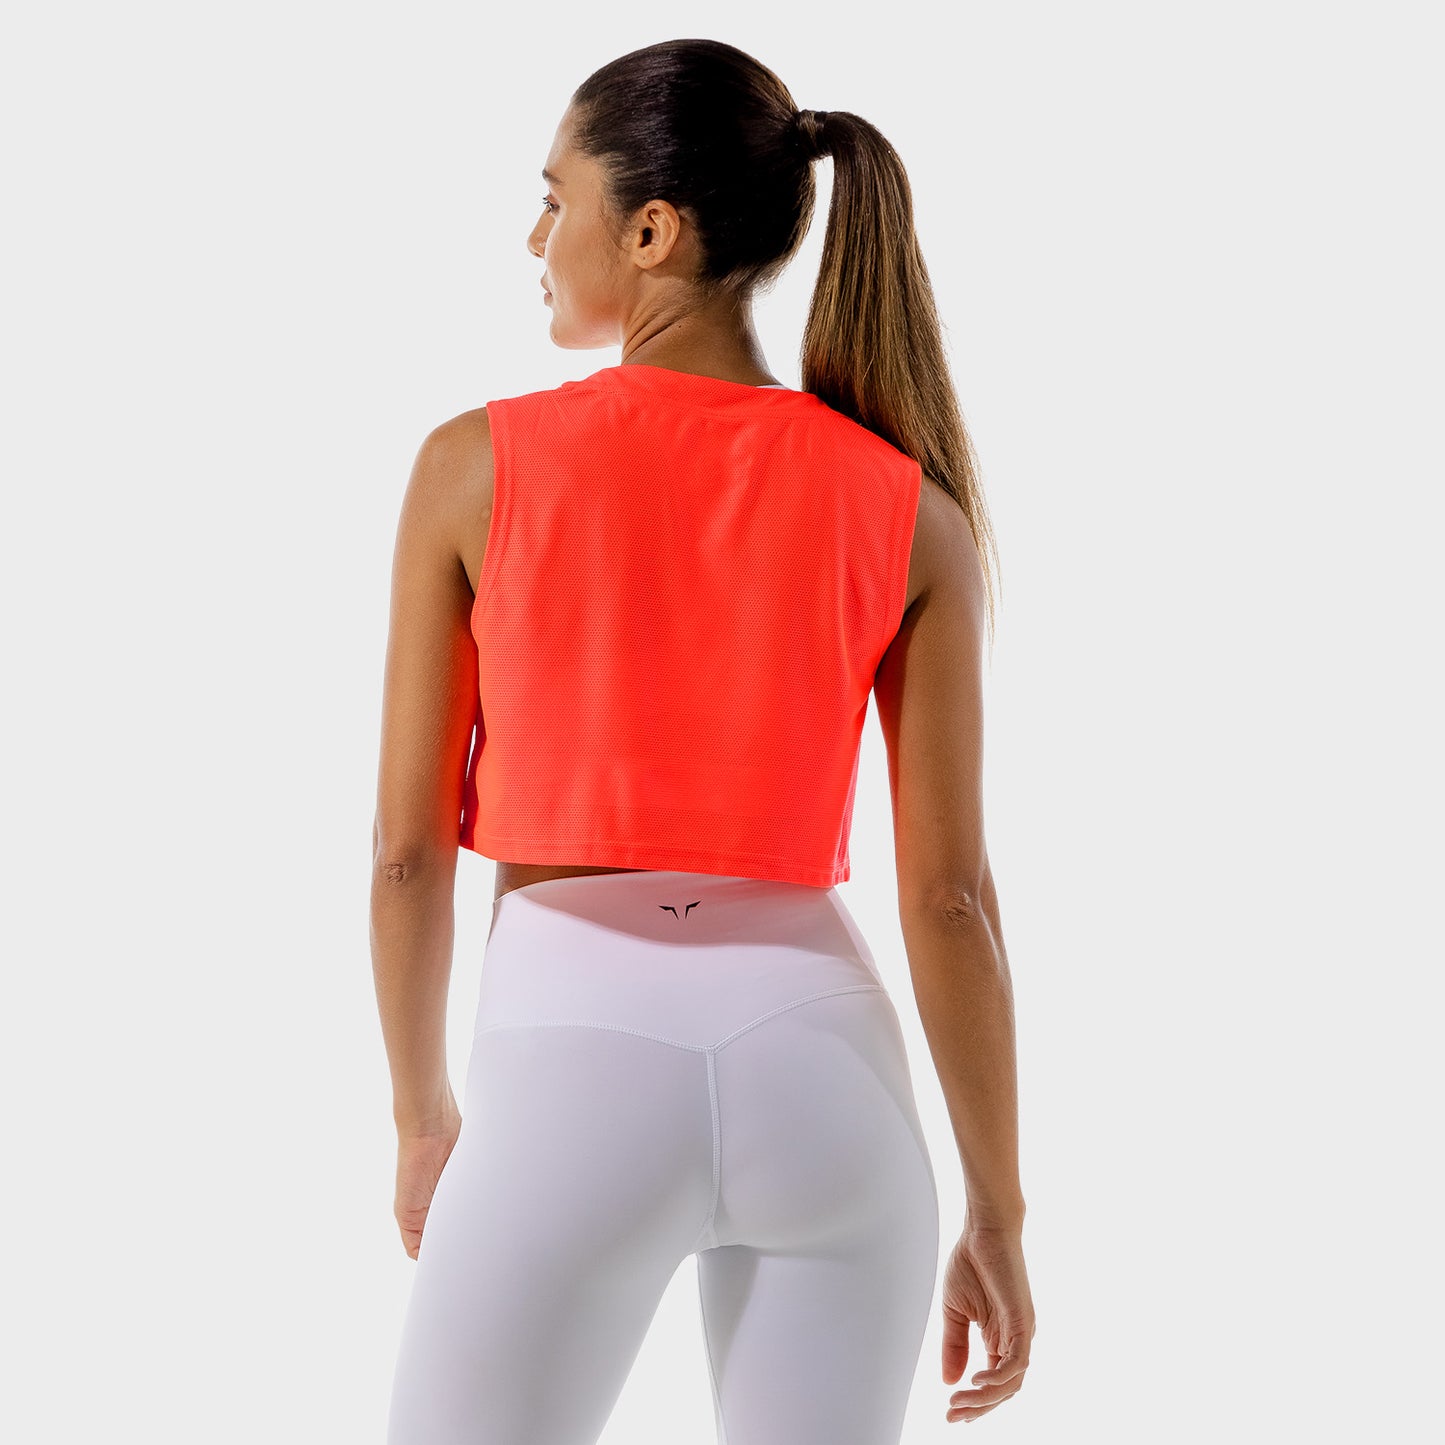 squatwolf-gym-t-shirts-for-women-limitless-crop-top-coral-workout-clothes